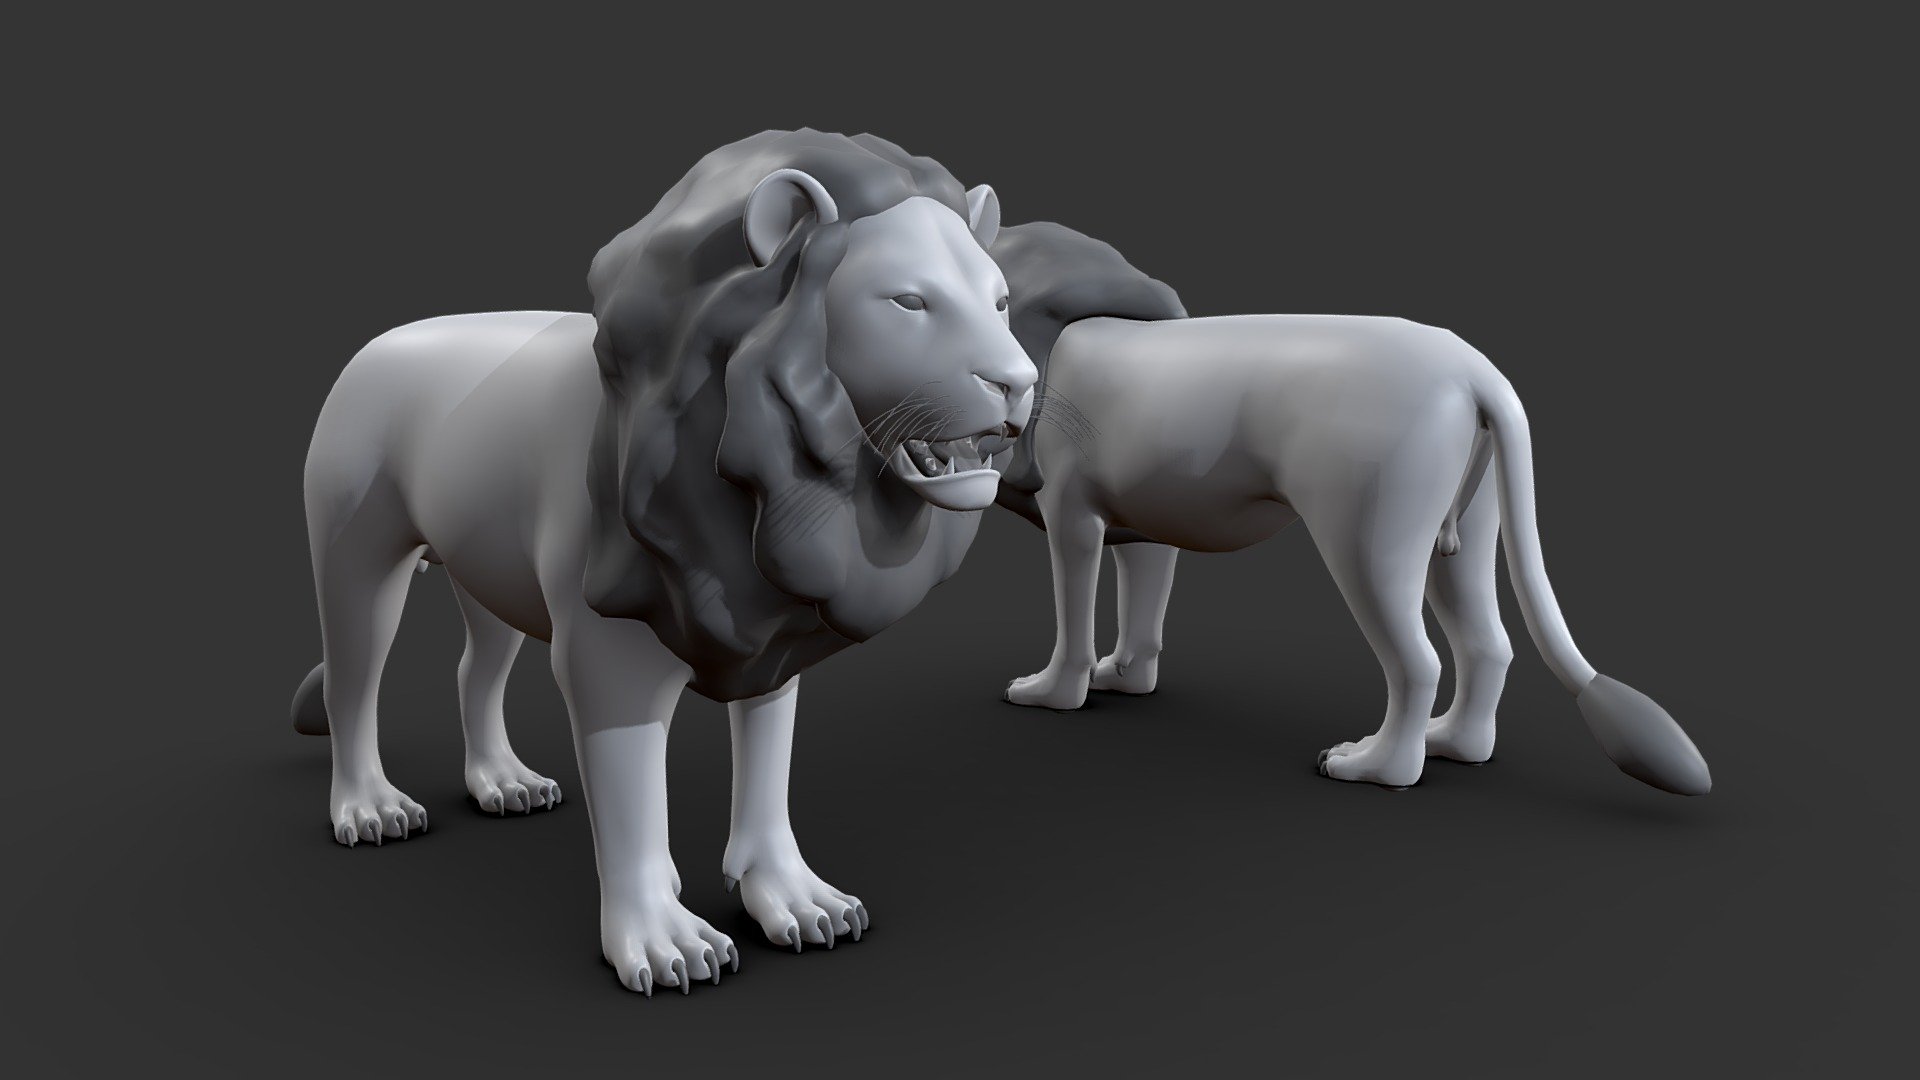 Visit the link to get this model on Artstation:


https://www.artstation.com/a/35516931
Lion model was made in Maya with proper topology and looping with Unwraped UV and no over lapping.

Ready for sculpting and texturing&hellip;

File format:





Obj




Fbx




Maya file




Blender file



Inside the product:





clean topology




Single Udim 




unwrapped Uvs for texturing




no overlapping UVs




proper naming and grouping



You May also like:


👉 https://skfb.ly/oQ9oN 👈
 - Lion - Topology + UV Map - Buy Royalty Free 3D model by Tashi59 (@tsering) 3d model